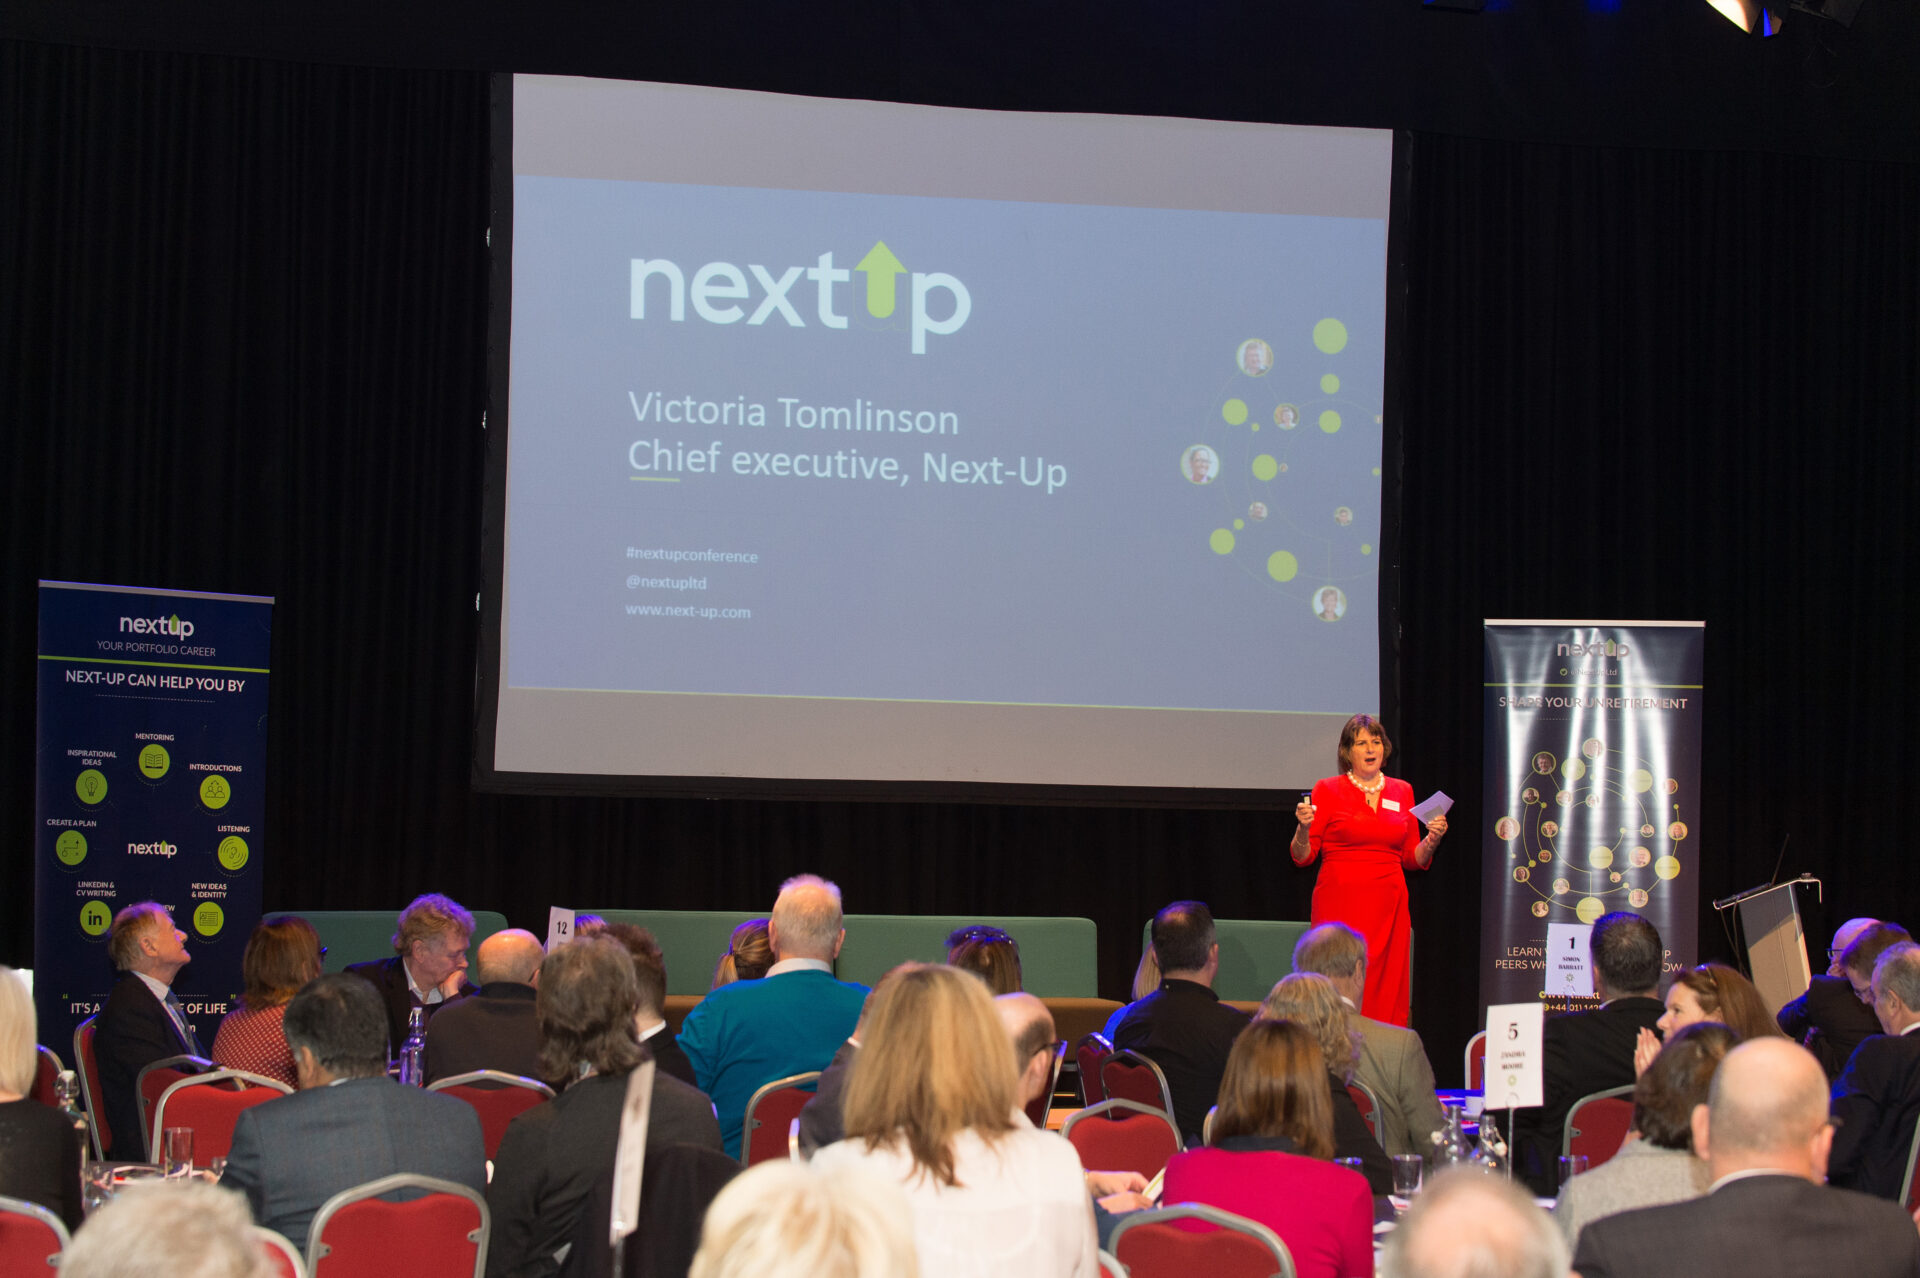 In photos The NextUp Conference